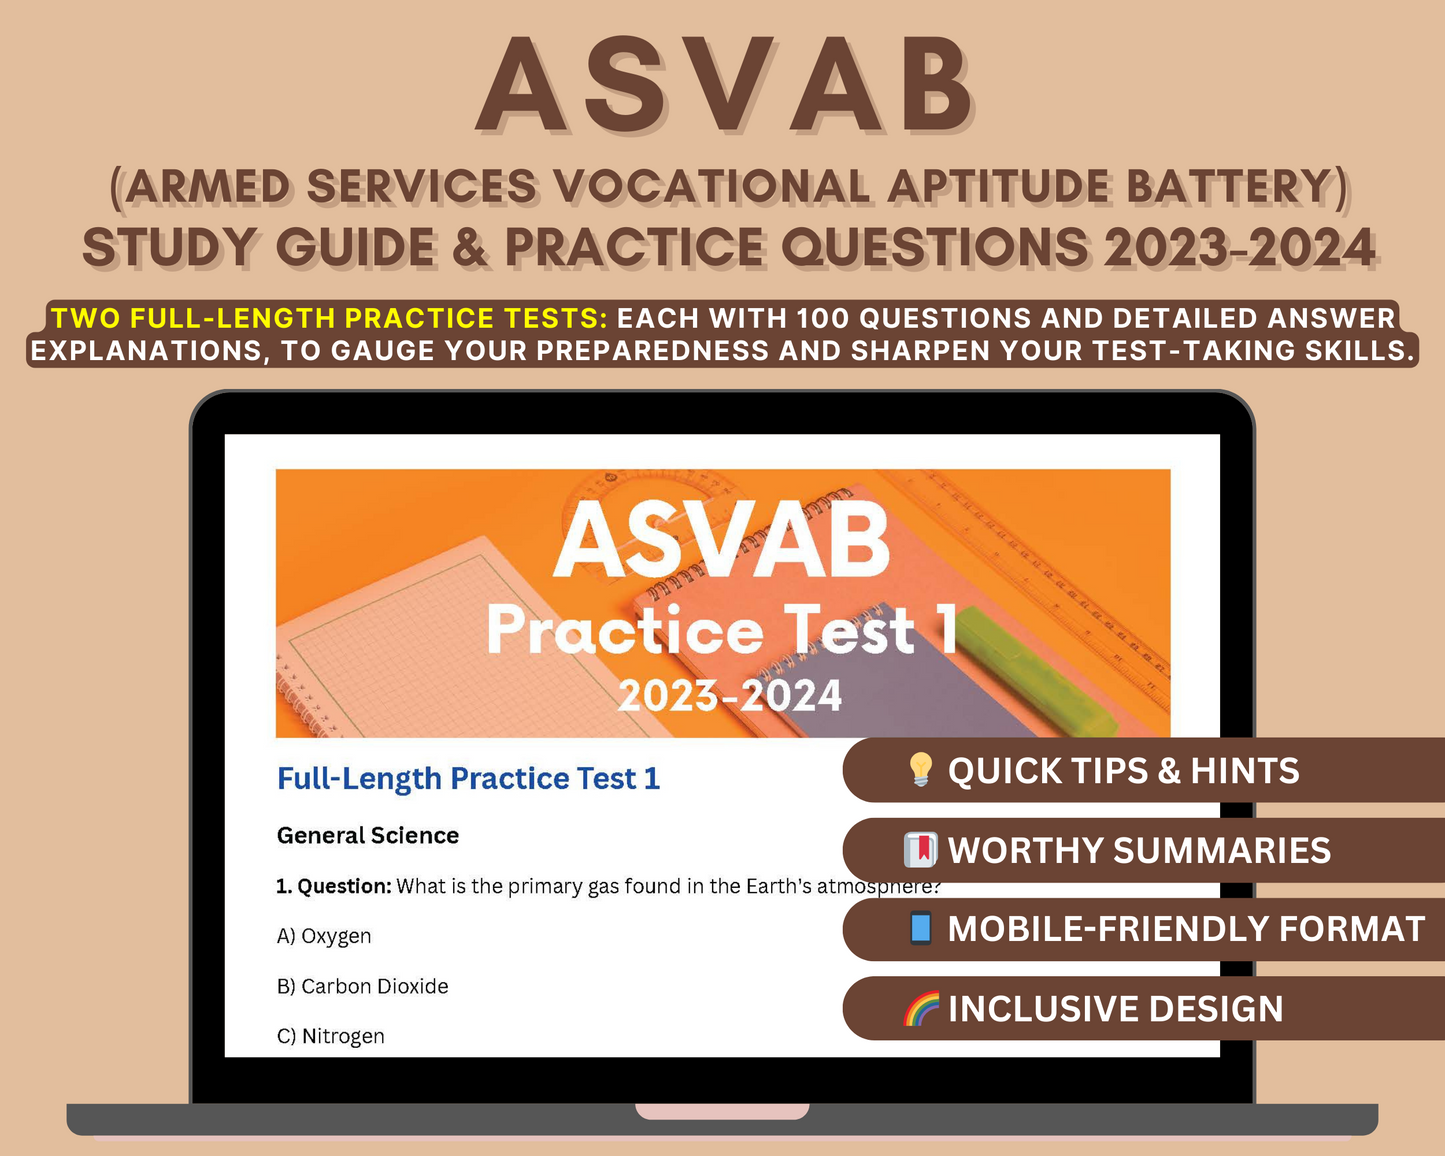 ASVAB Exam Prep Study Guide 2023-2024: In-Depth Content Review, Practice Tests & Exam Strategies for Military Careers